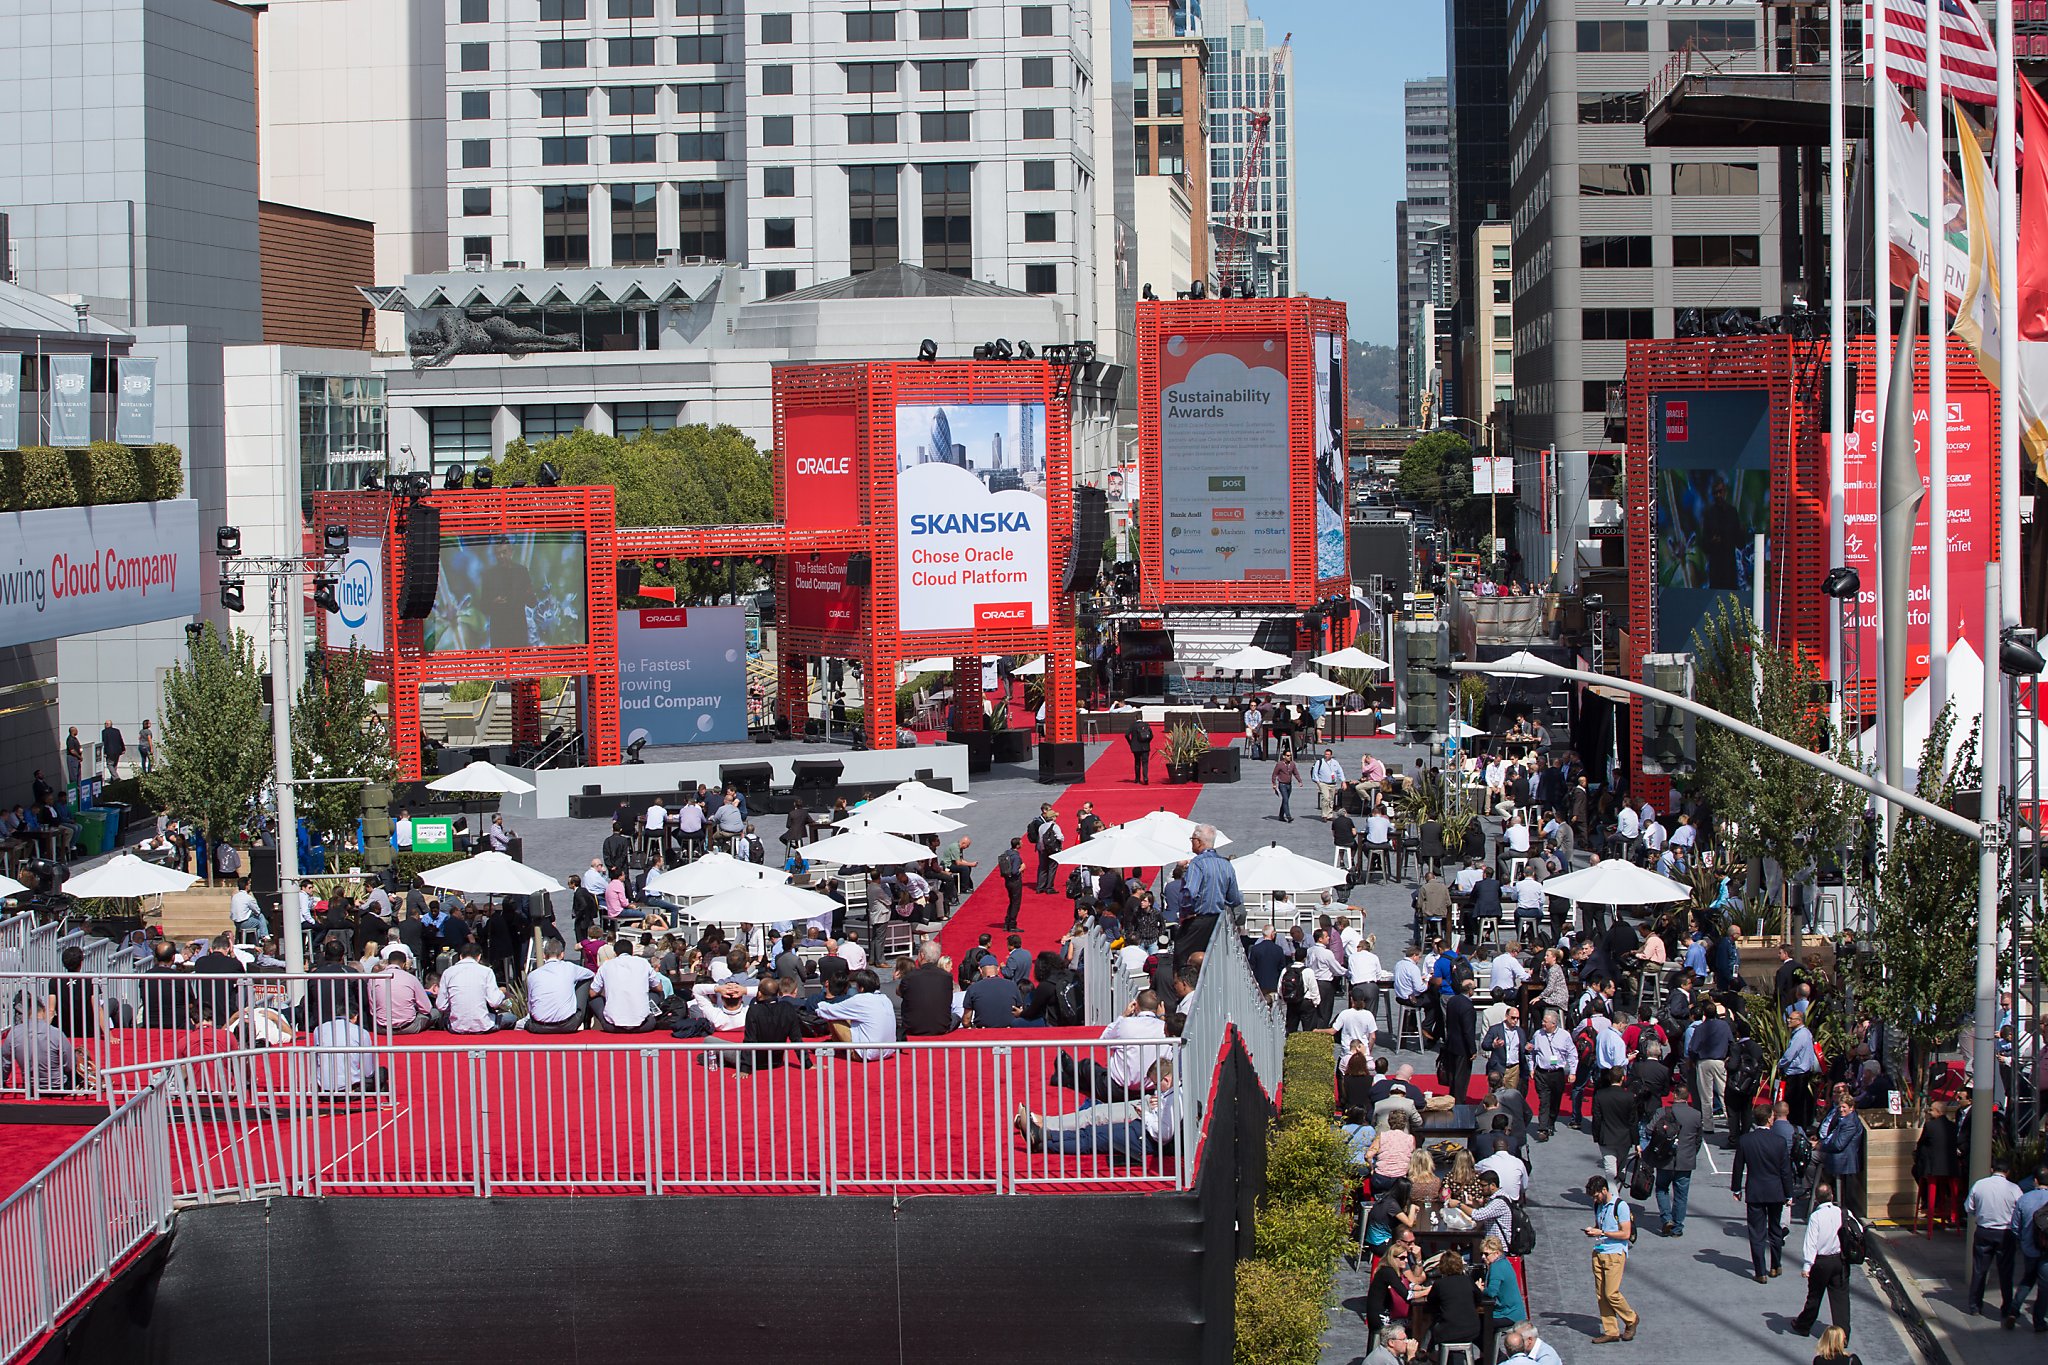 SF loses Oracle’s huge OpenWorld tech conference to Las Vegas